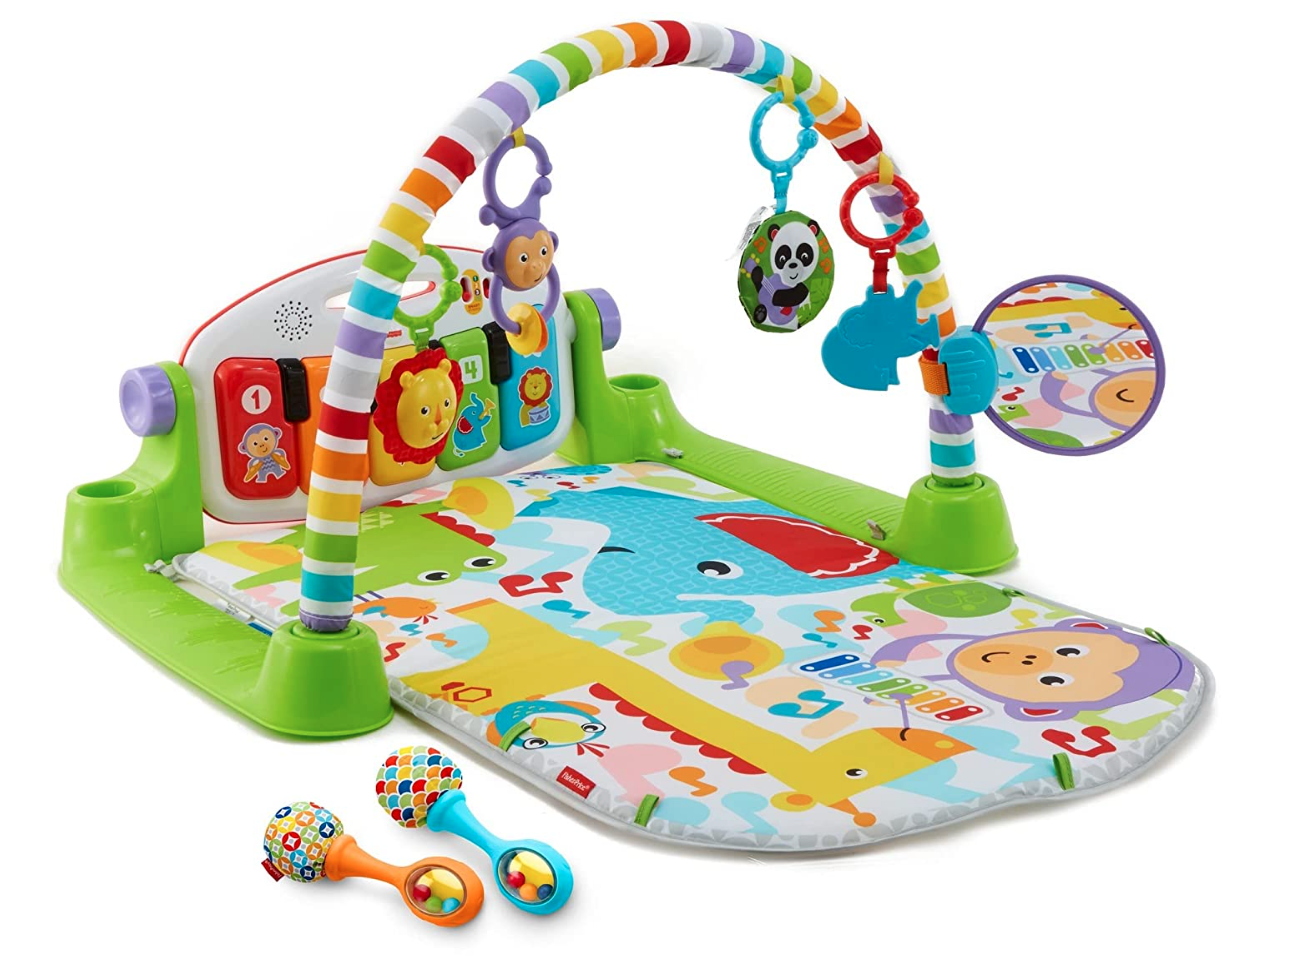 Fisher-Price Deluxe Kick & Play Piano Gym Mat